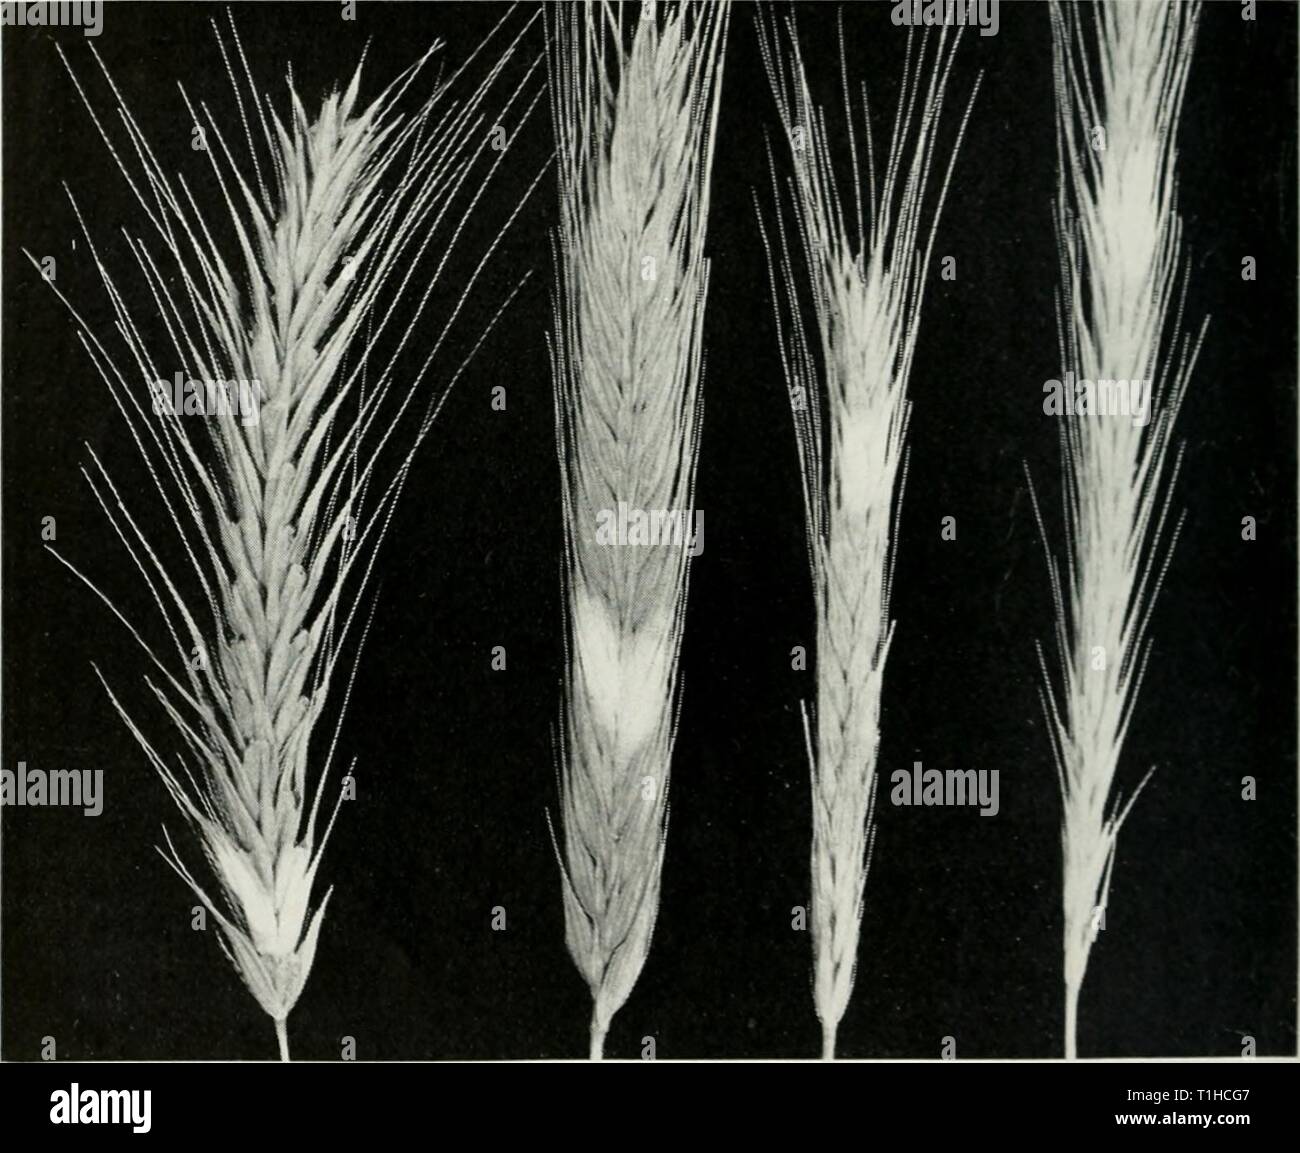 Diseases of small grain crops Diseases of small grain crops in Illinois  diseasesofsmallg35boew Year: 1939  102 ILLINOIS NATURAL HISTORY SURVEY CIRCULAR 85 danger rye. Bacterial blight was first observed on rye near Bloomington, 111., in 1921. It is, however, of no economic im- portance. A full discussion of appearance, life history and control of bacterial blight is given under barley diseases (page 82). SCAB Gibberella Sanbinetii Rye scab, called also Fusarium blight and head blight, is the same disease as scab on other cereals. A full discussion is given under wheat (page 28). Badly disease Stock Photo